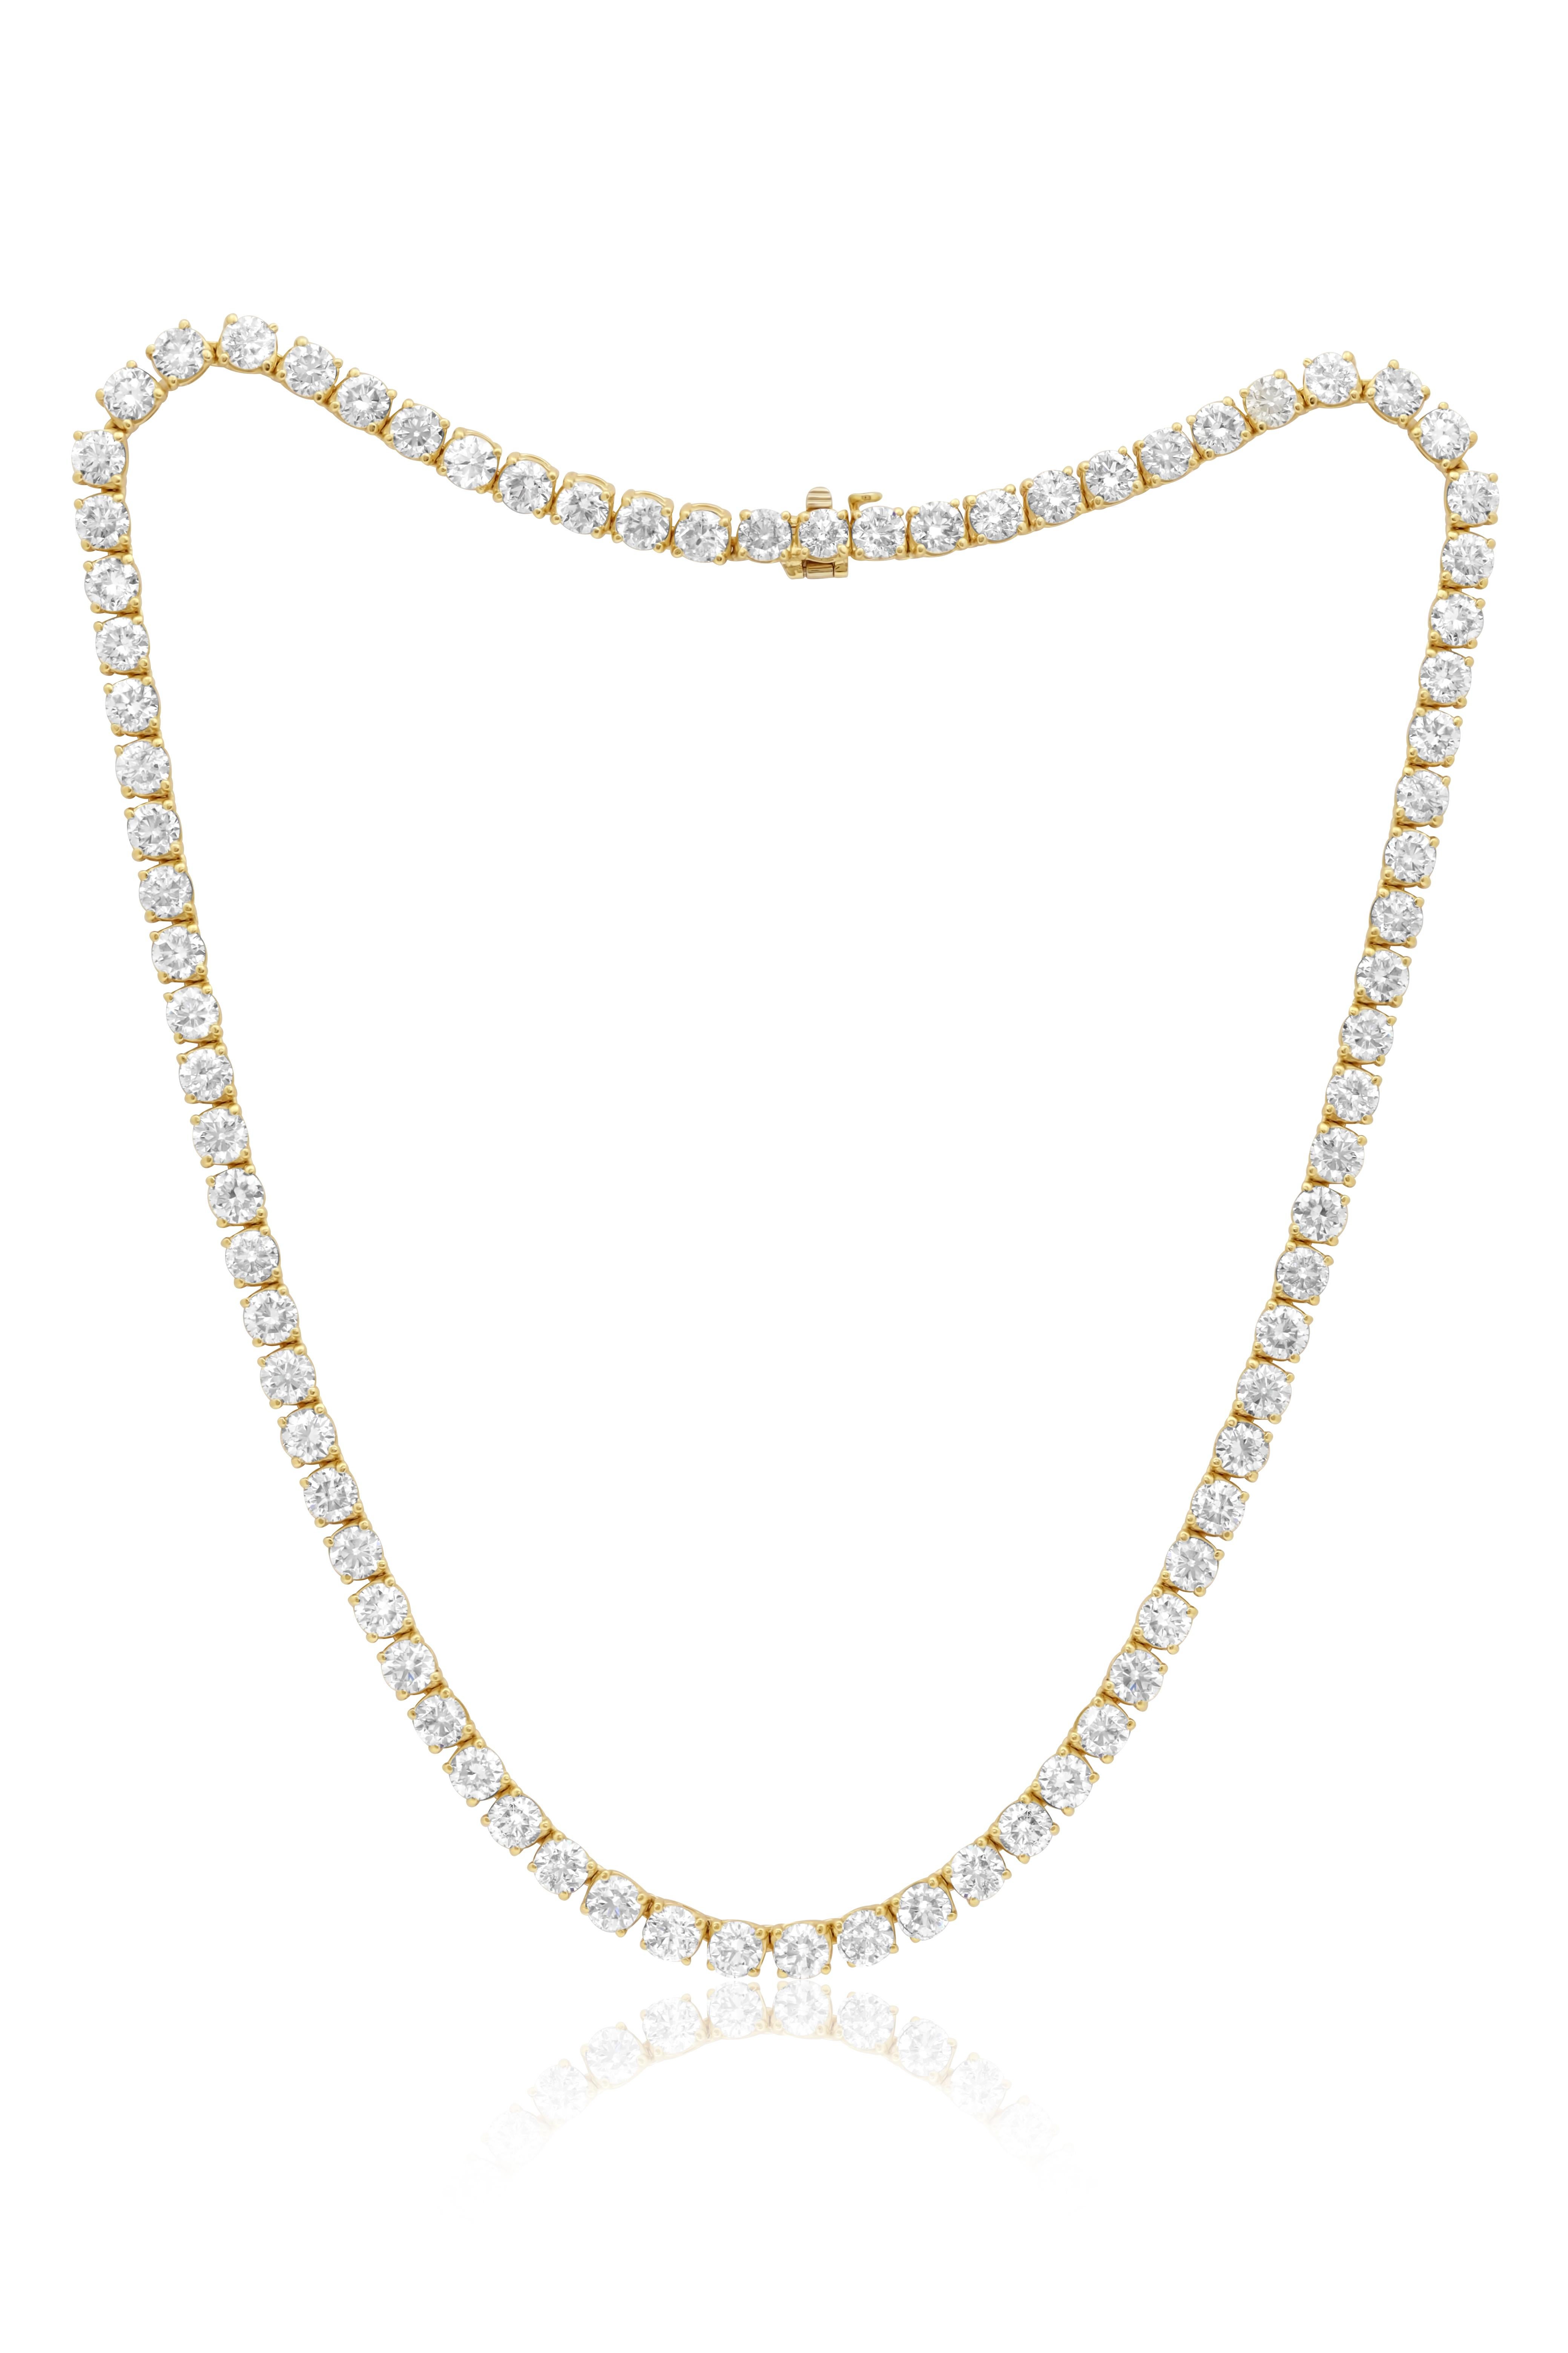 Modern Diana M. Custom 7.00 cts Round 4 Prong Diamond 14K Yellow Gold Tennis Necklace  For Sale